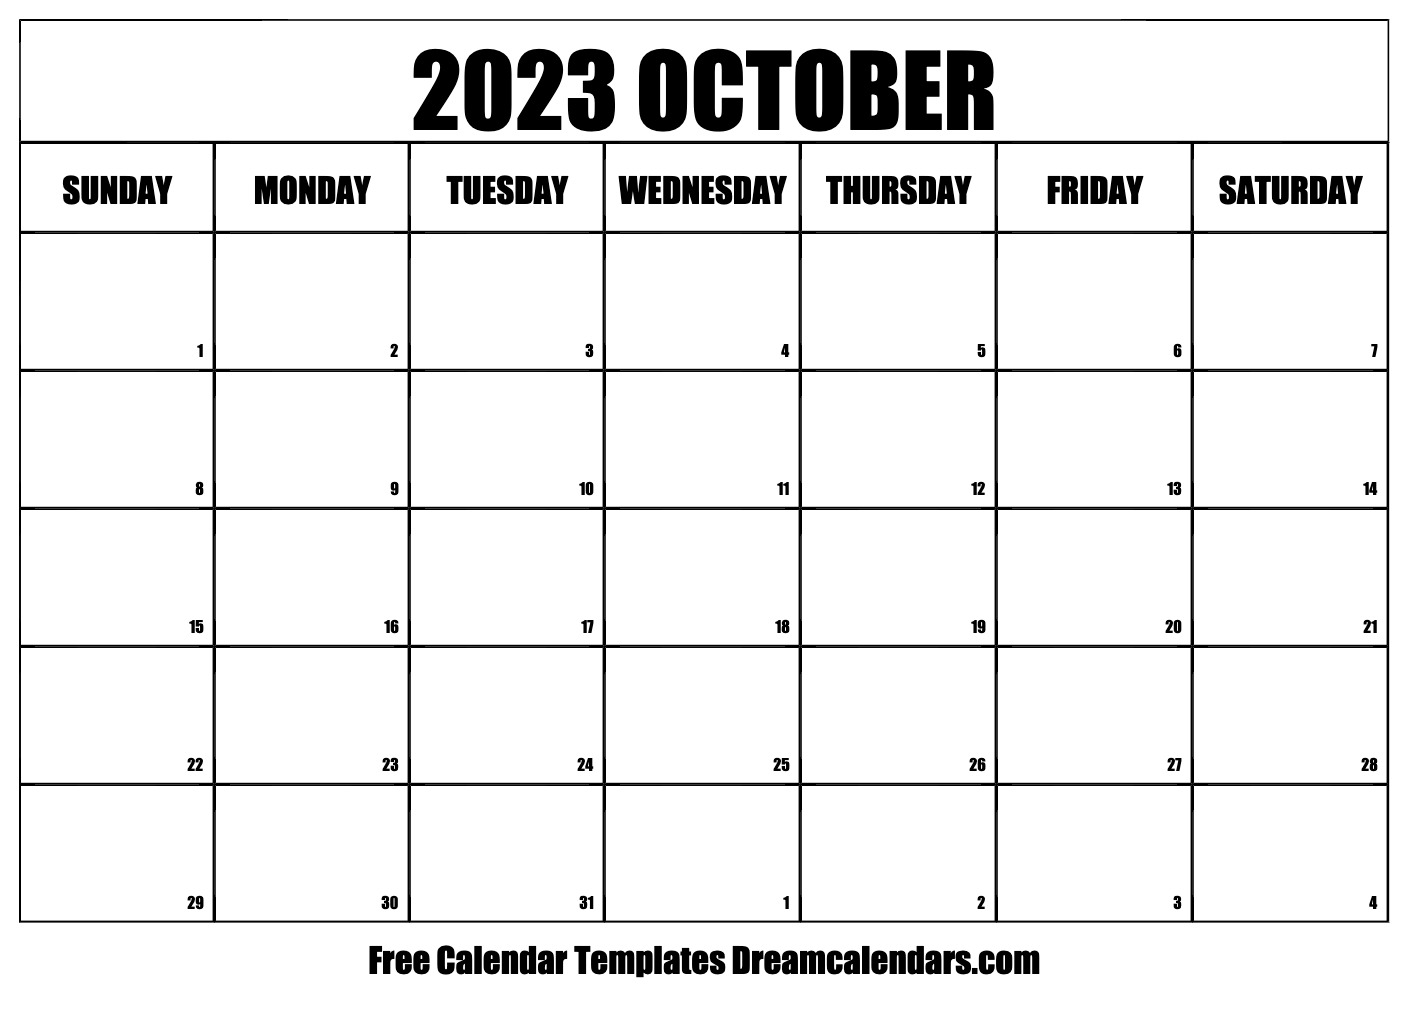 october-2023-calendar-free-blank-printable-with-holidays